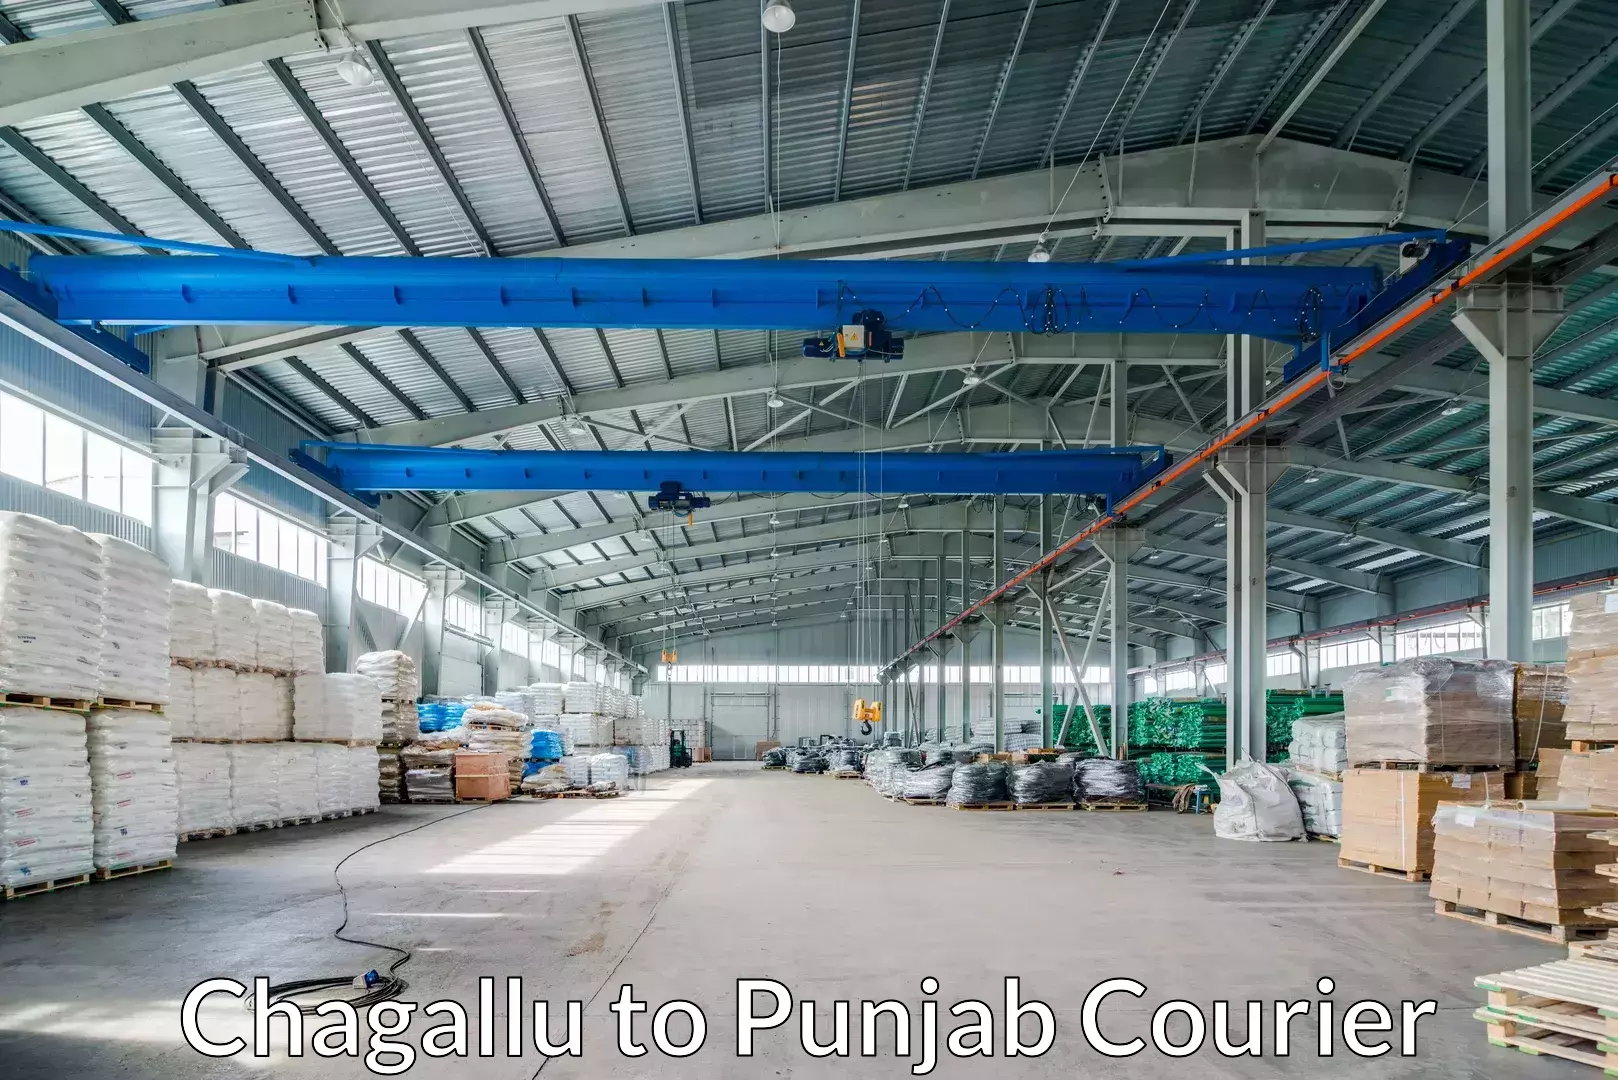 Effective moving solutions Chagallu to Punjab